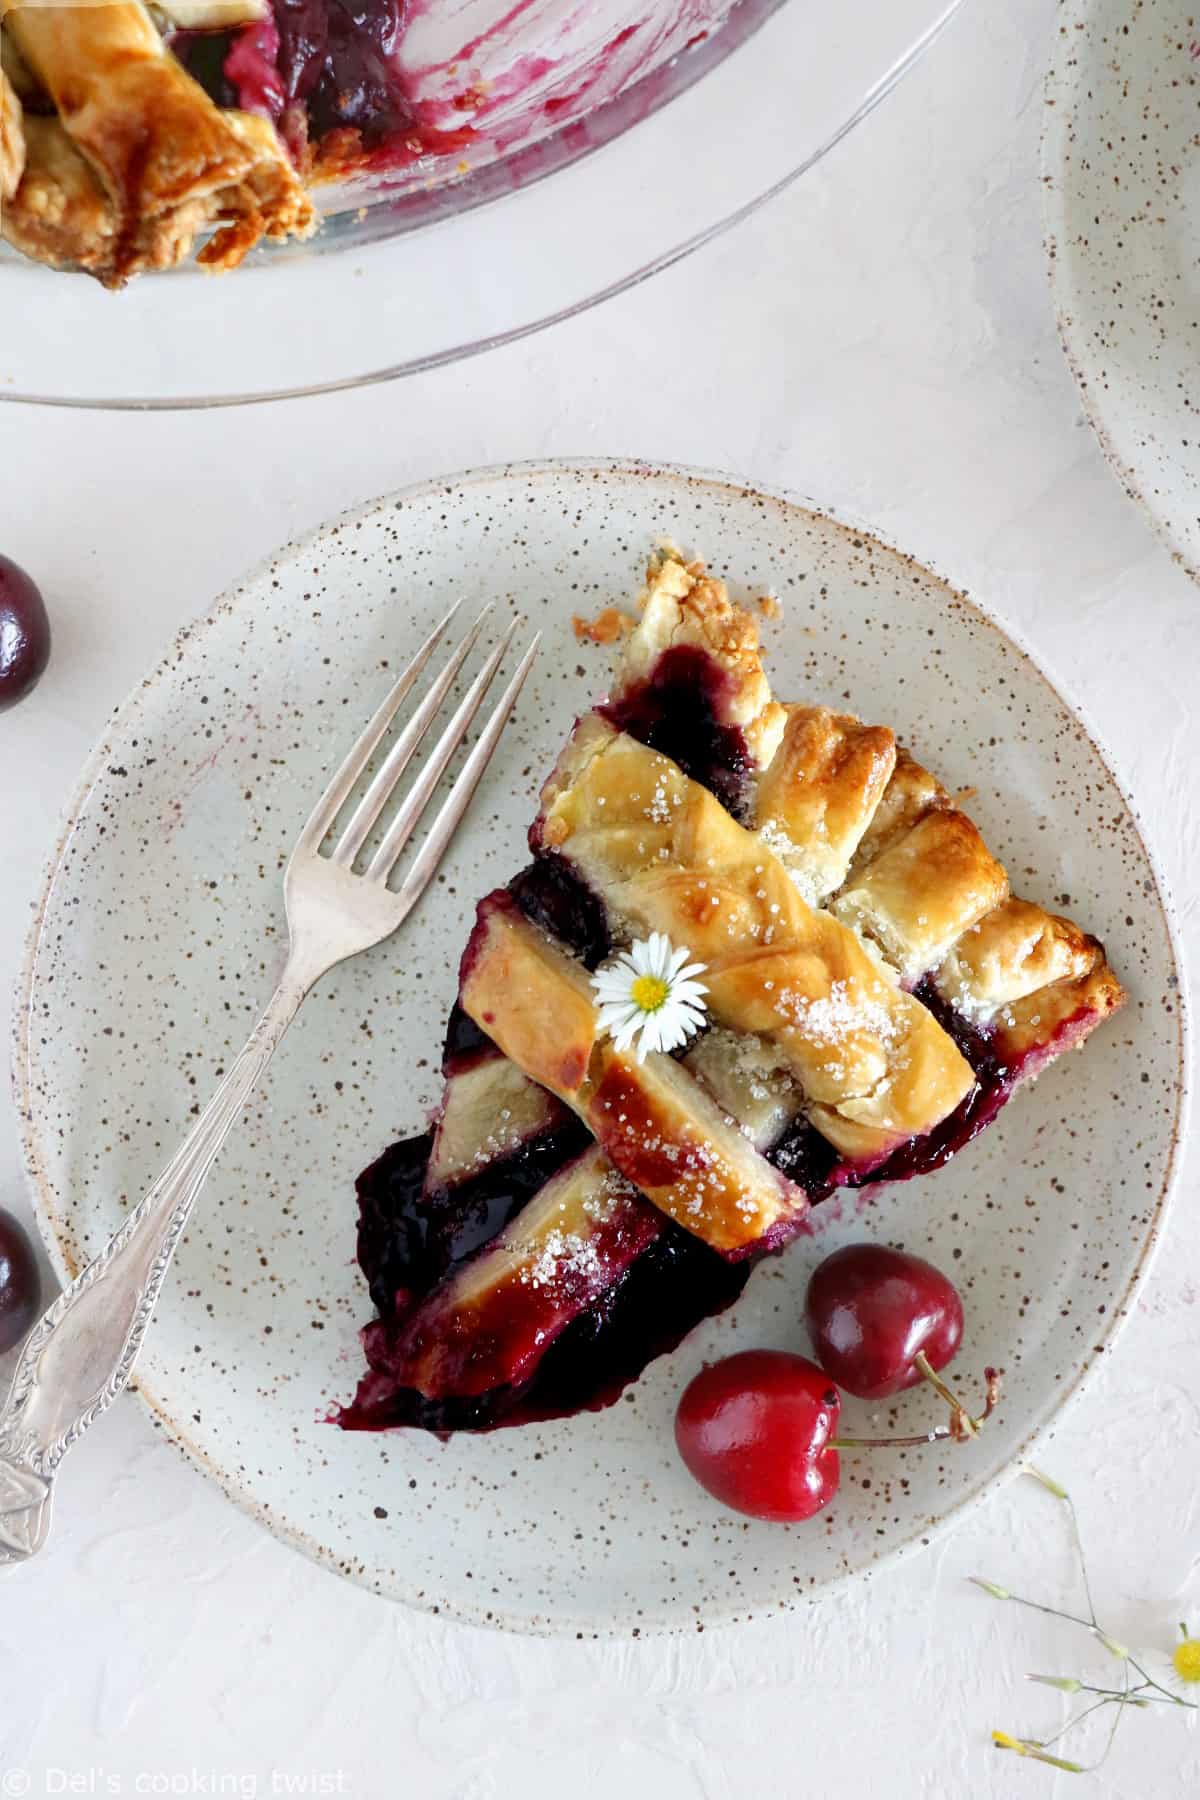 Say hello to the best homemade cherry pie, baked from scratch with an easy butter pie crust.